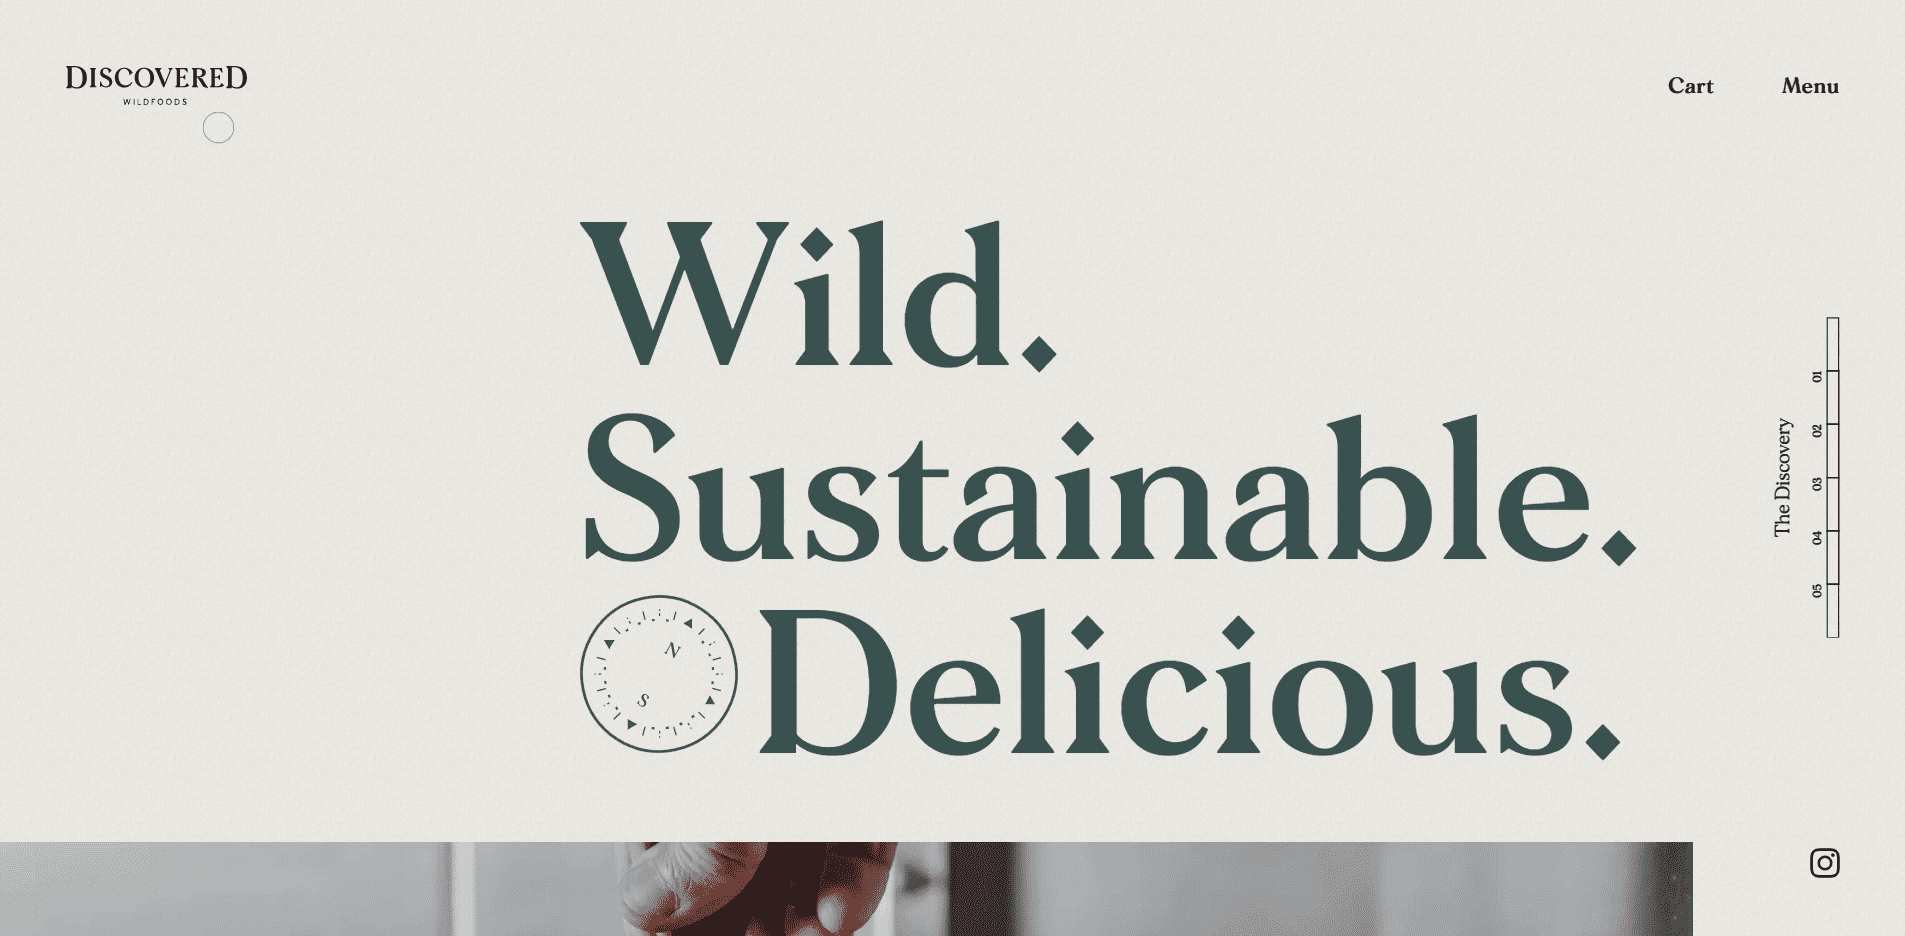 Best Agency Website for Discovered Wildfoods